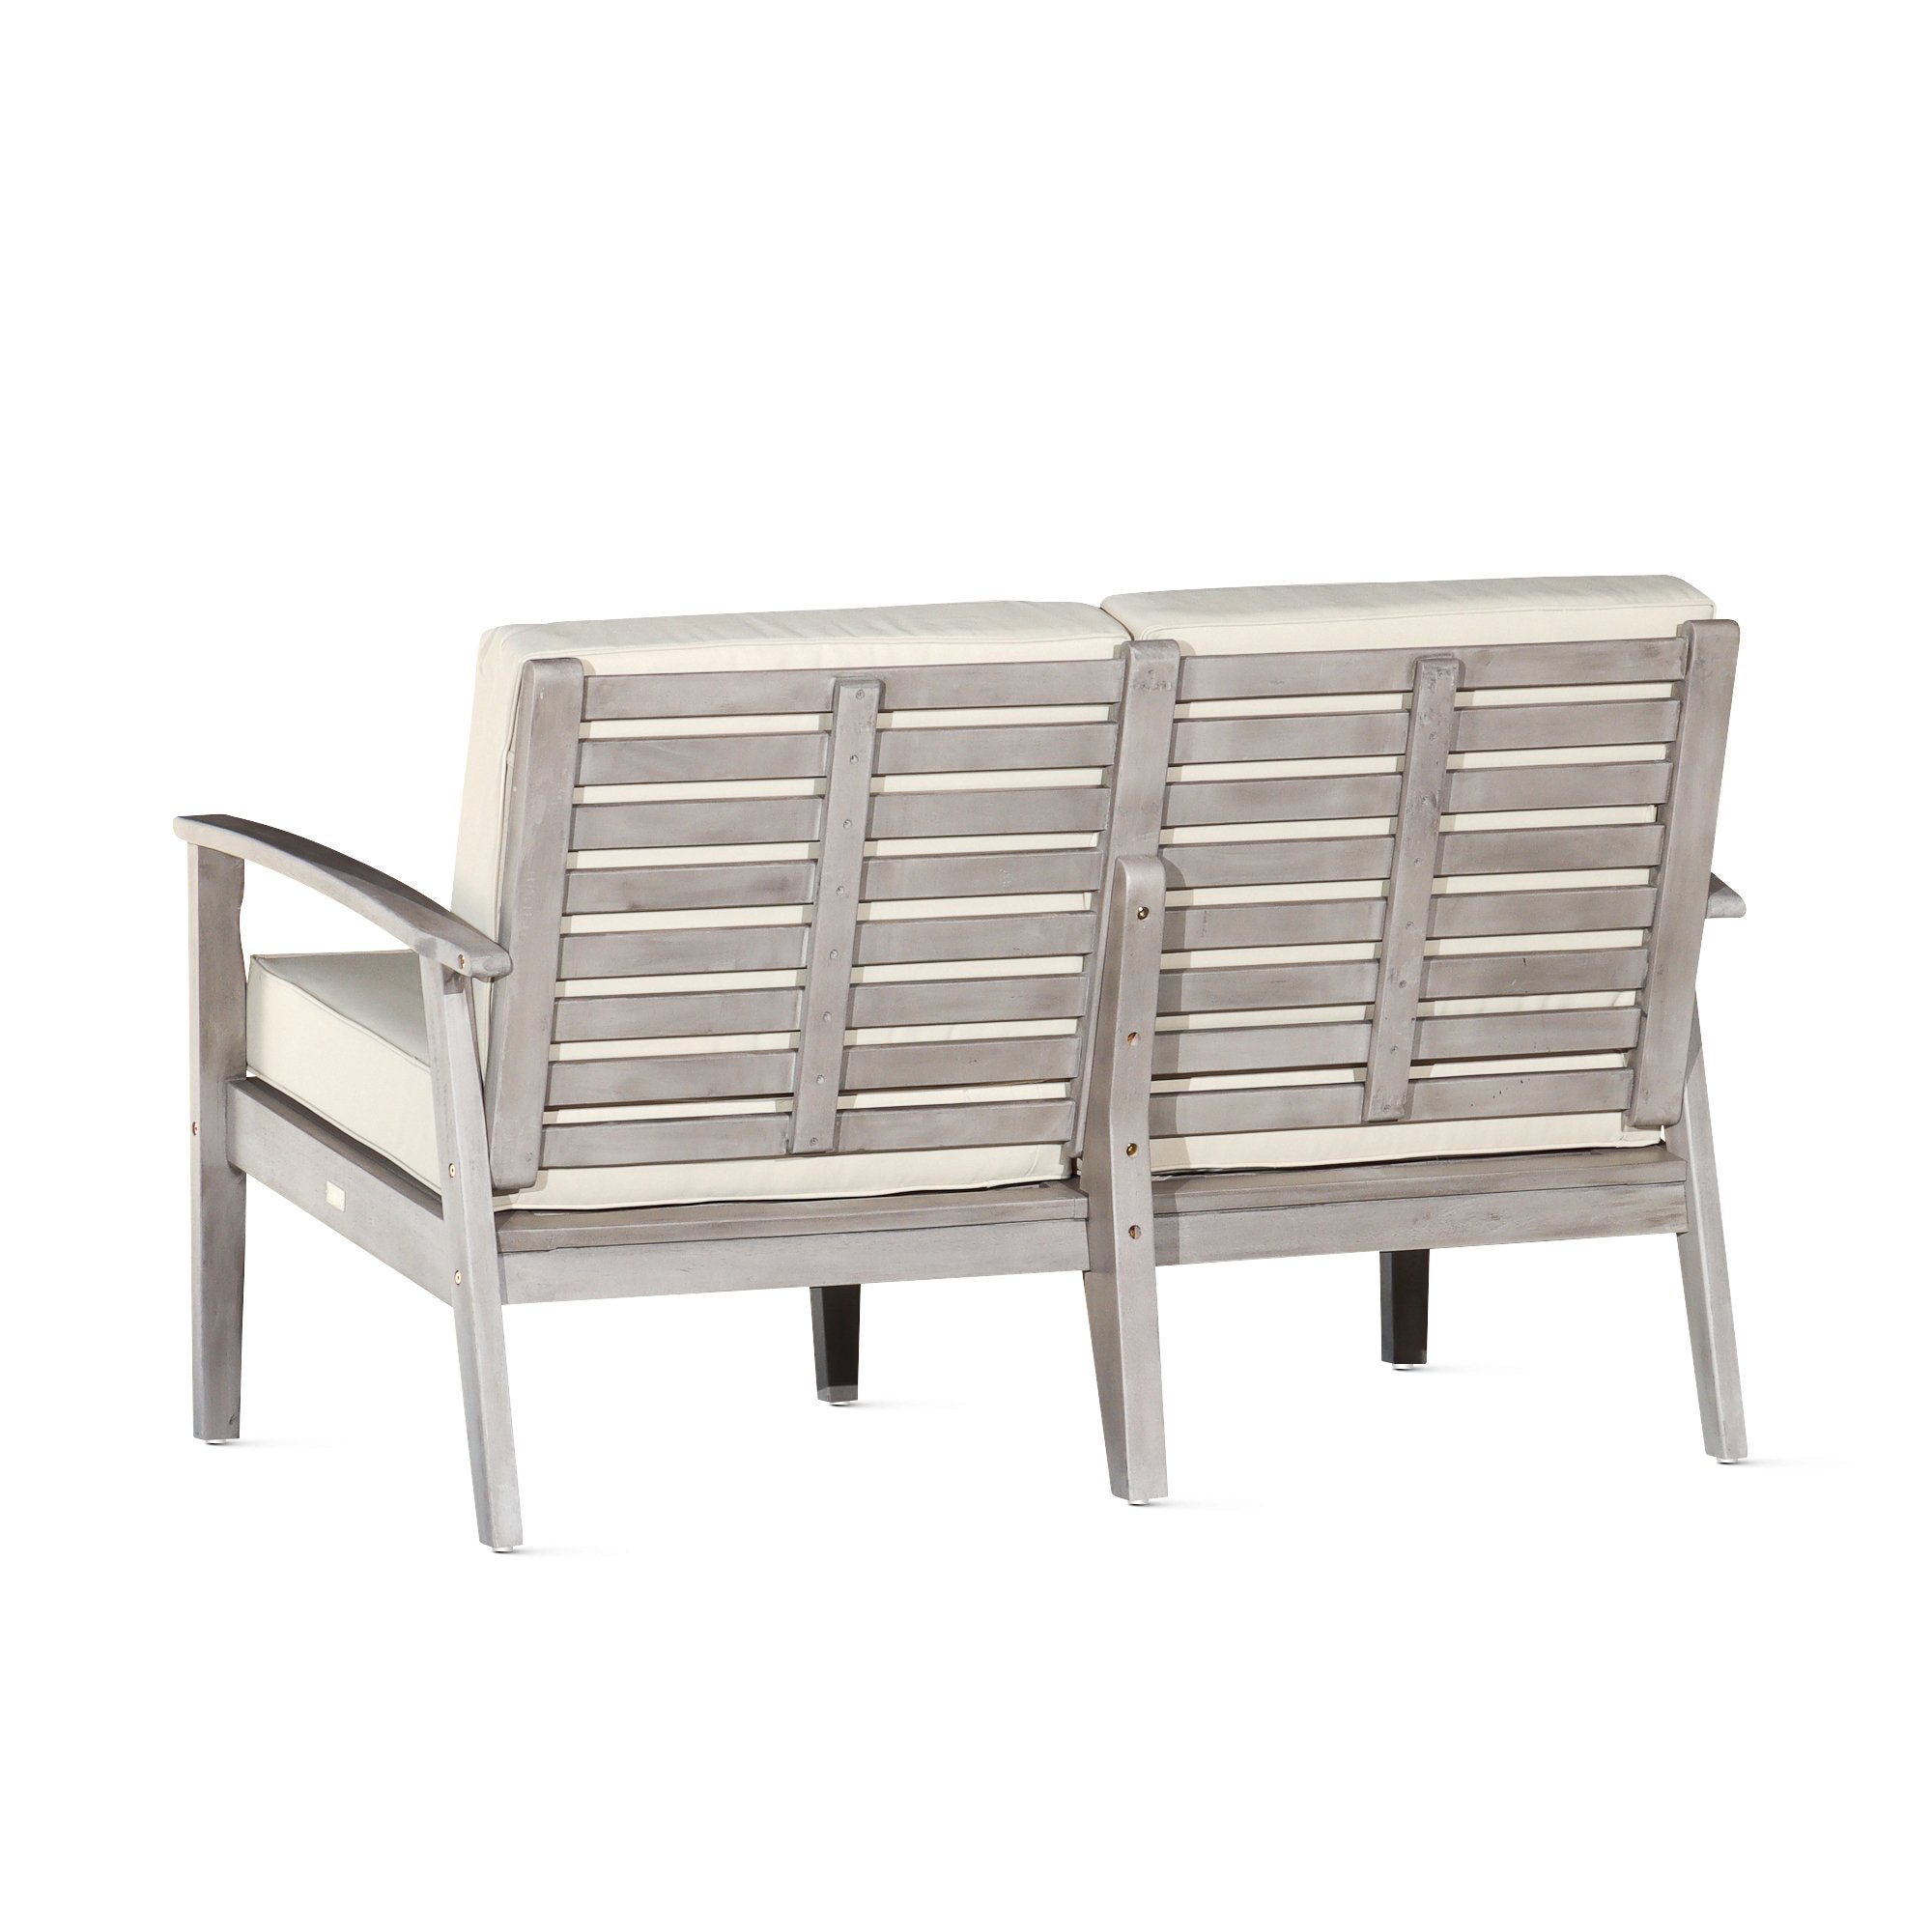 Outdoor Loveseat with Cushions, Driftwood Gray Finish, Sand Cushions - Tuesday Morning-Chairs & Seating